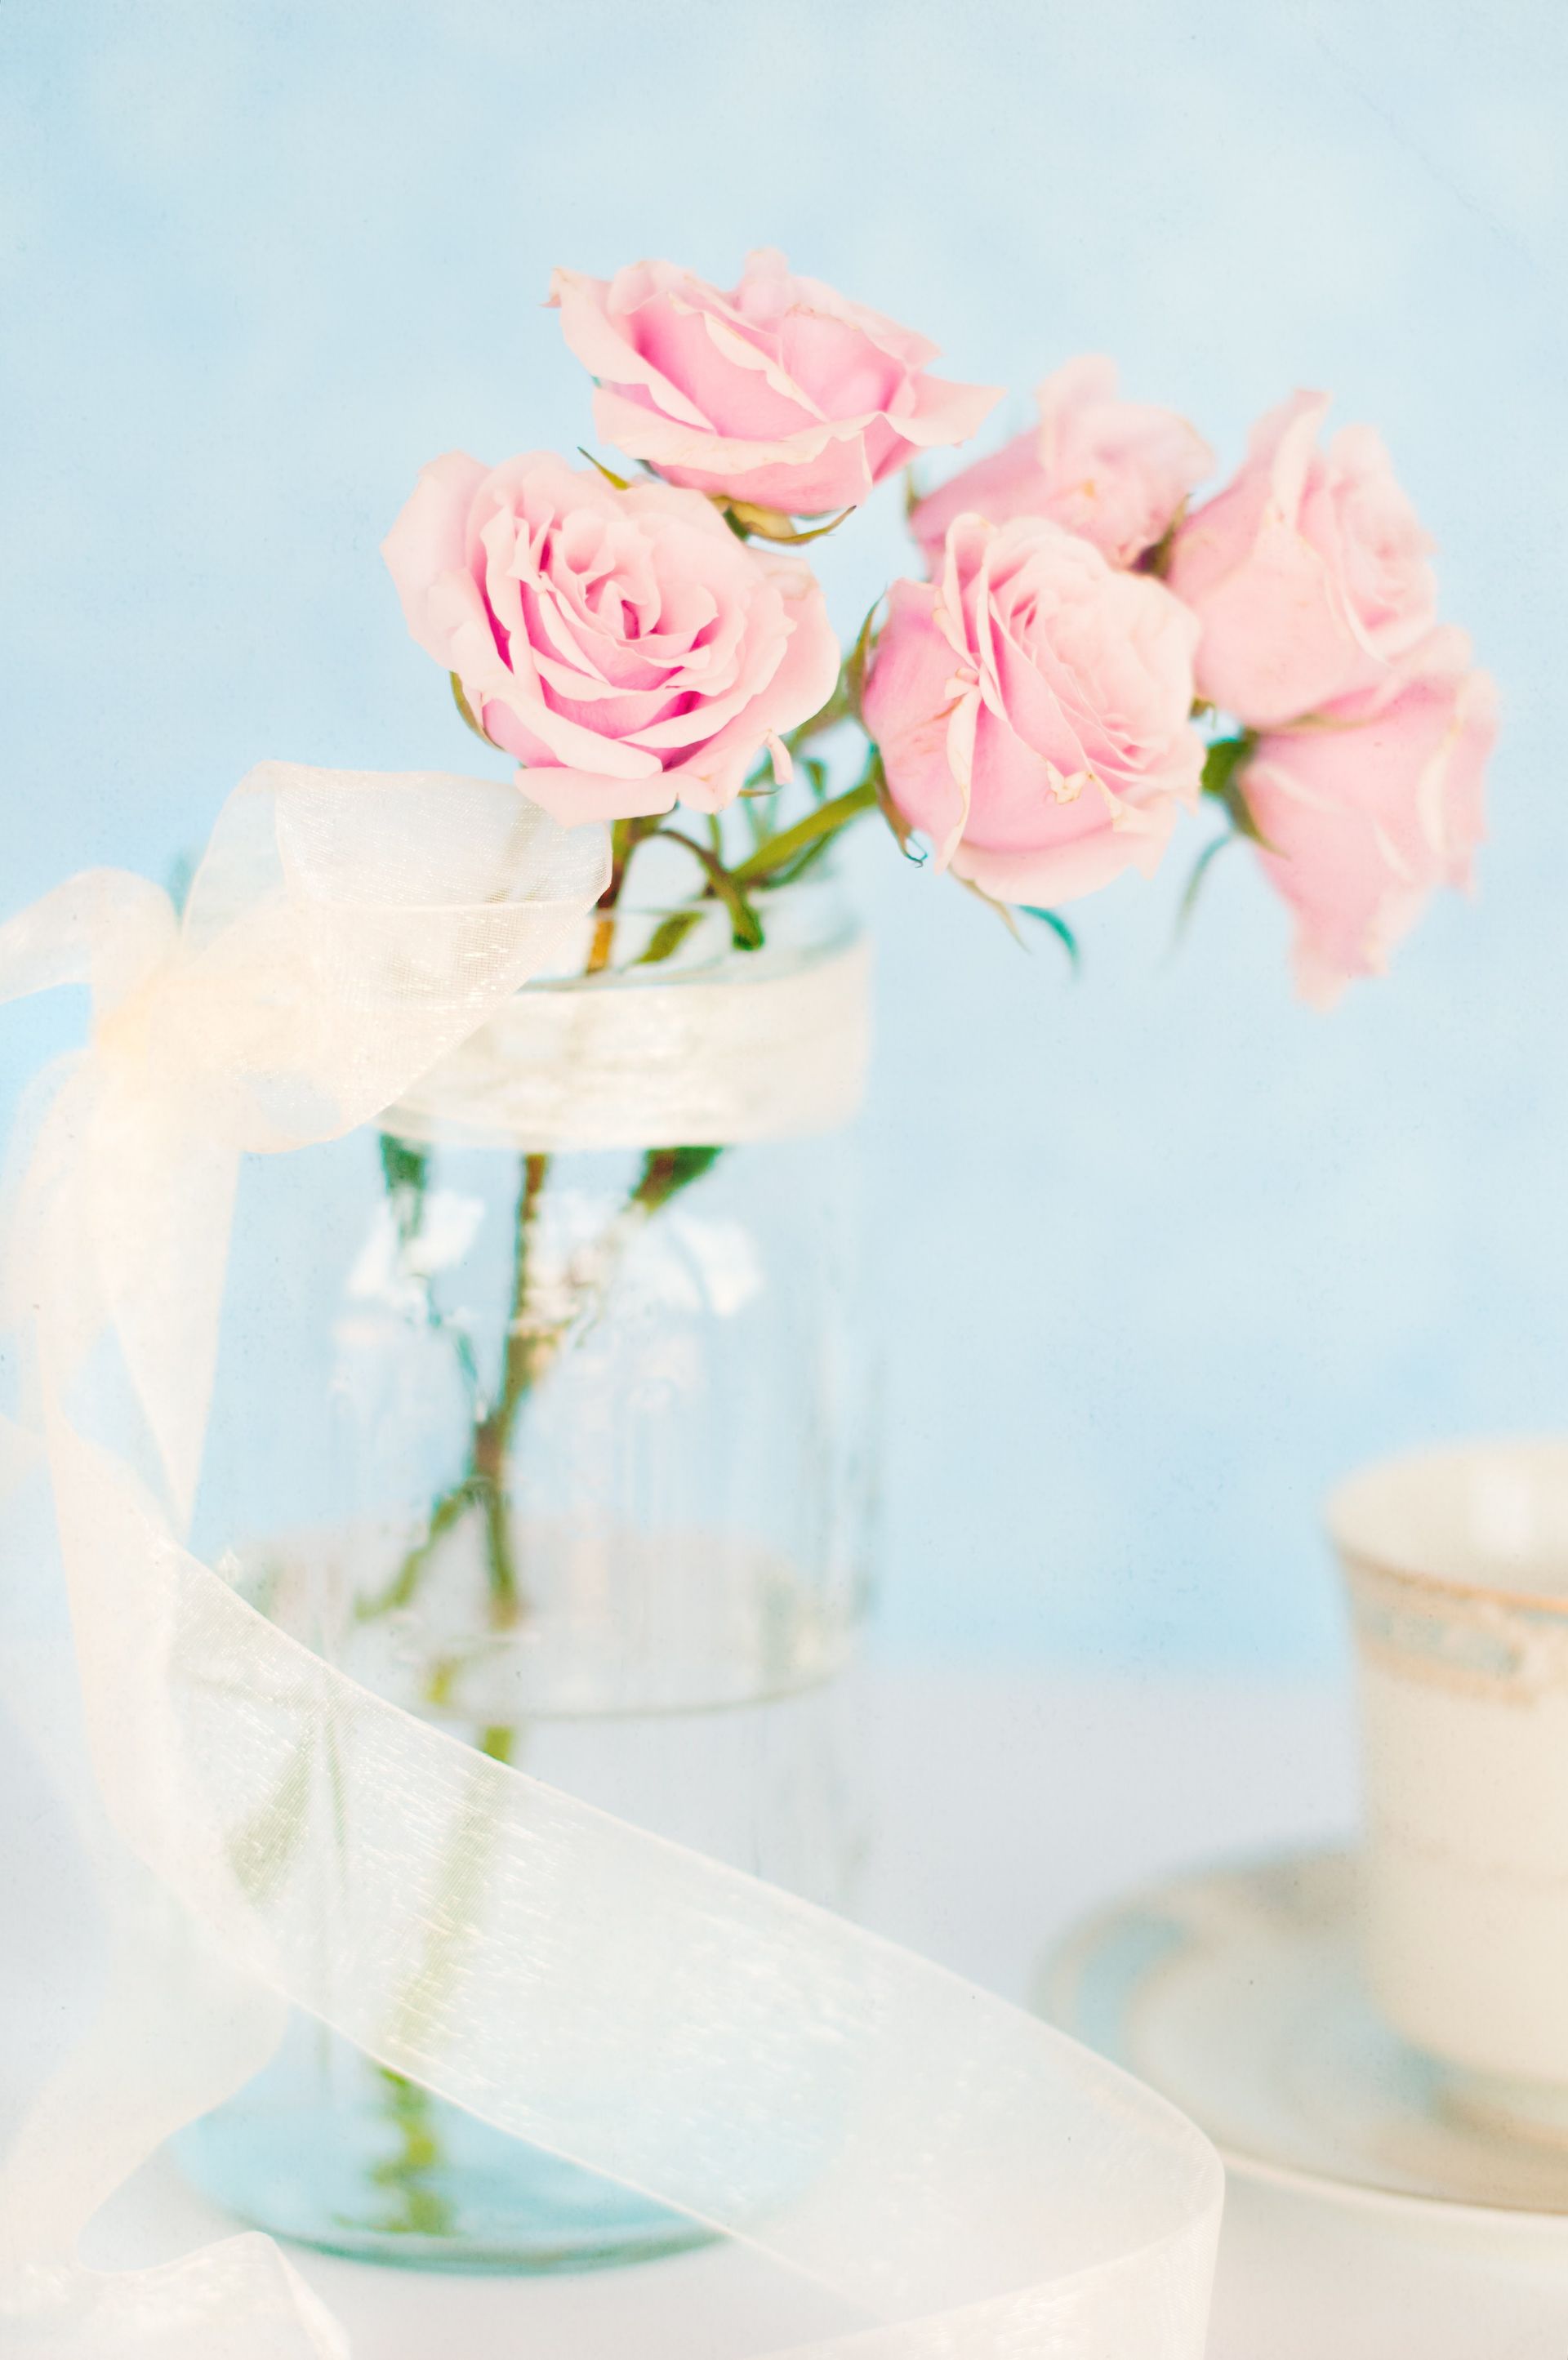 Pink roses in a jar on a table.